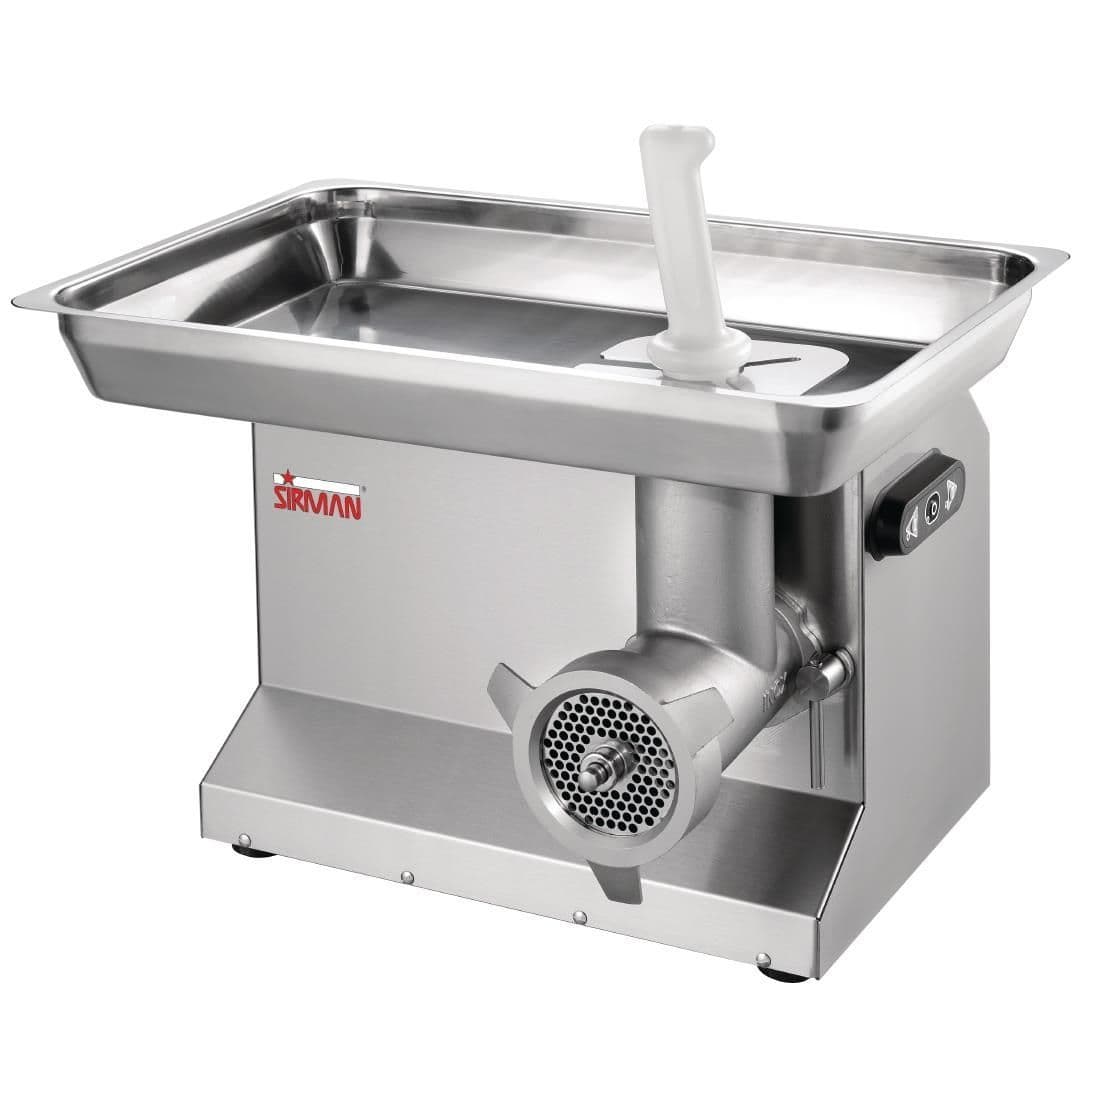 FP526 Sirman Colorado Meat Mincer TC32 JD Catering Equipment Solutions Ltd